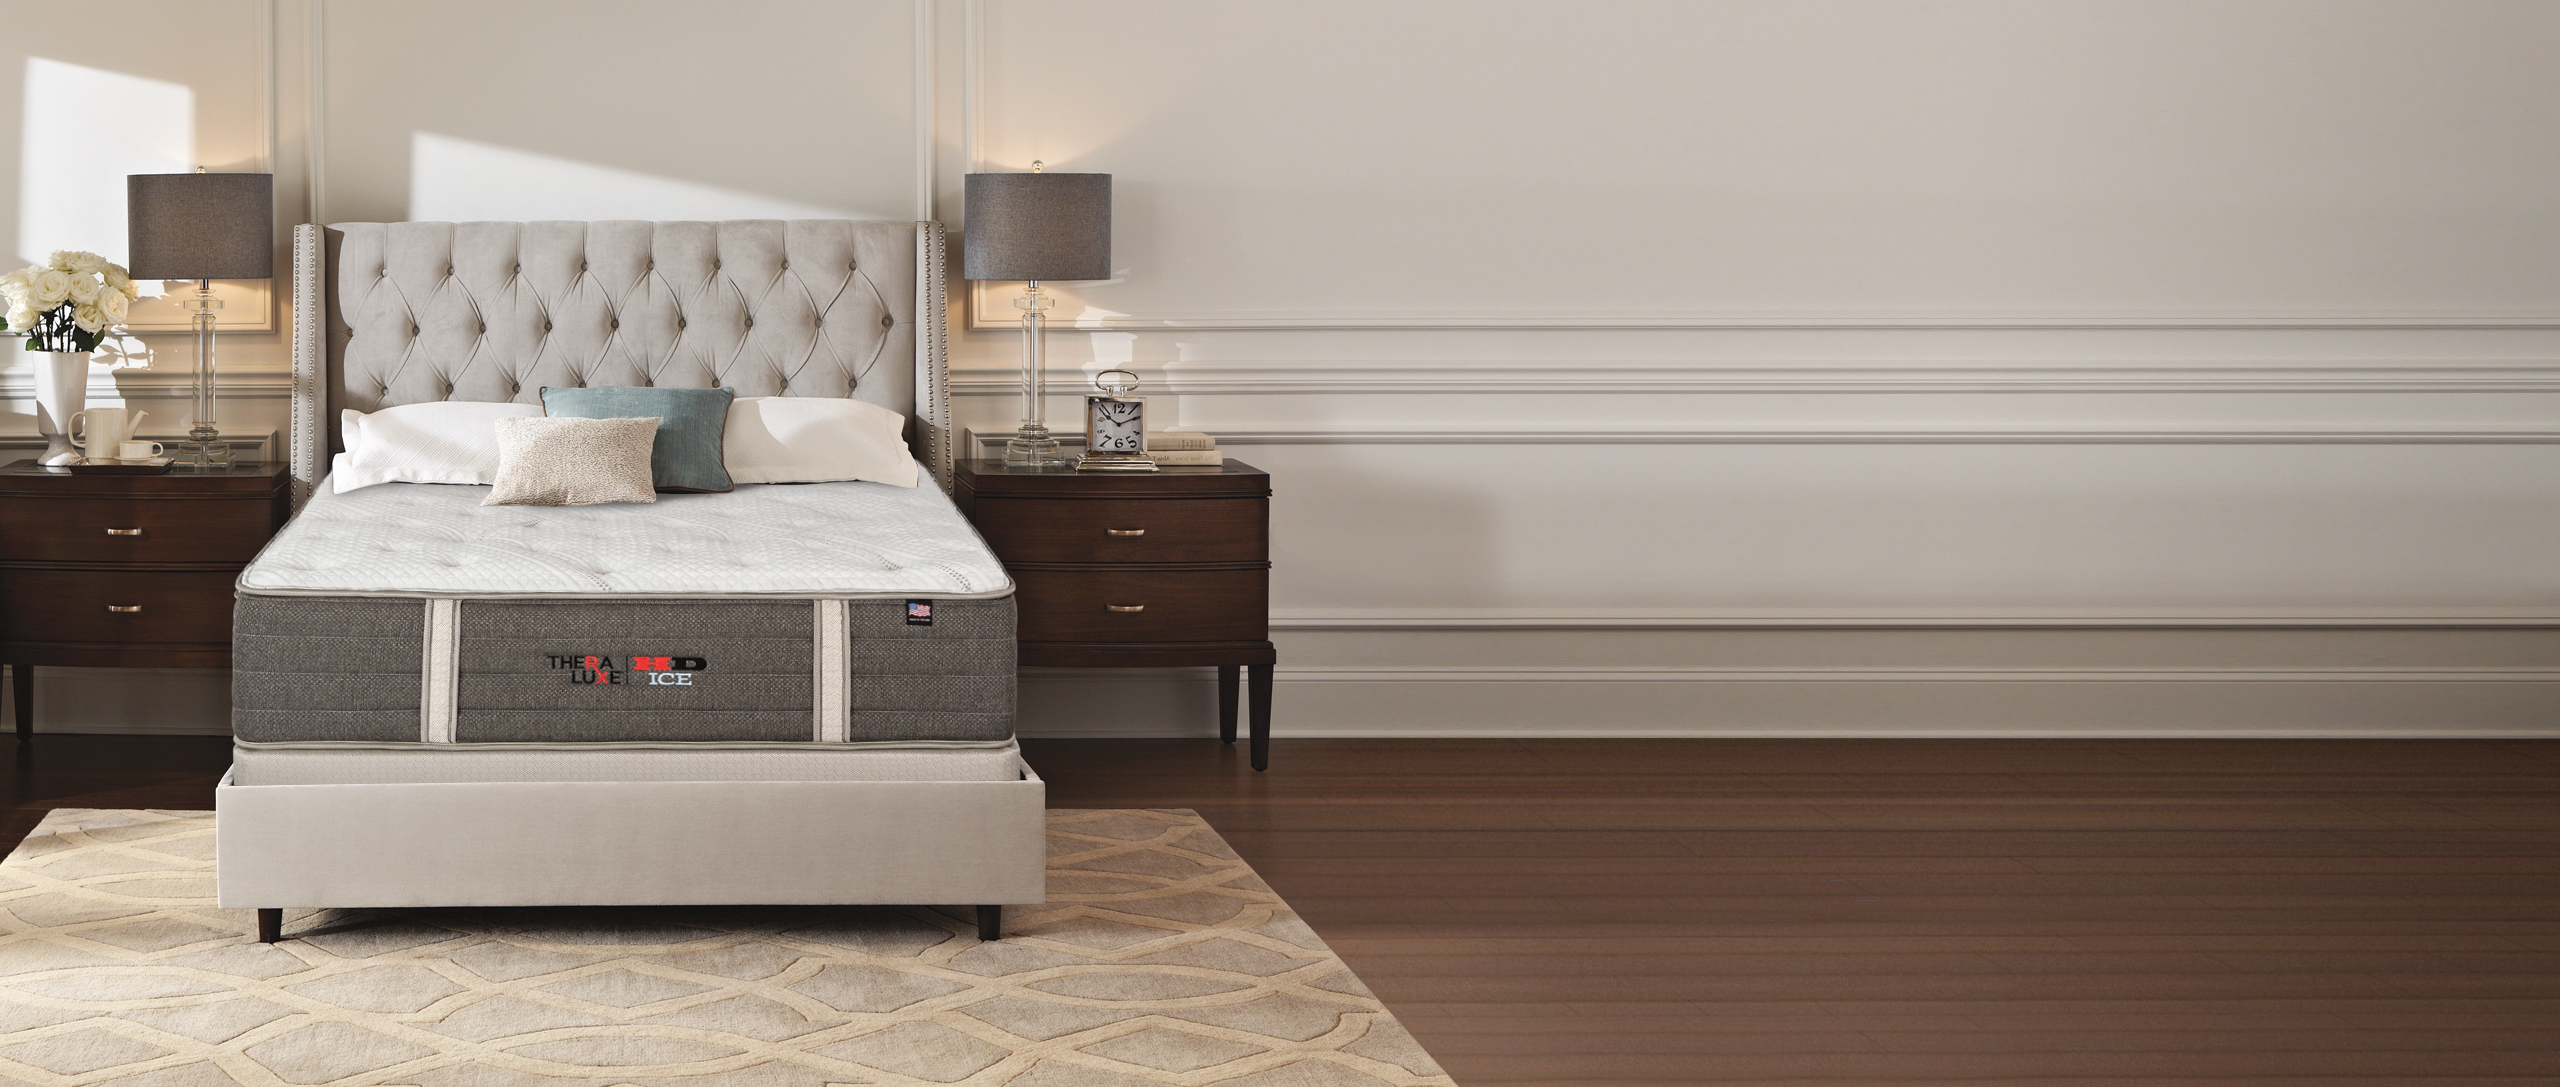 TheraLuxe HD ICE Mattress in a bedroom setting